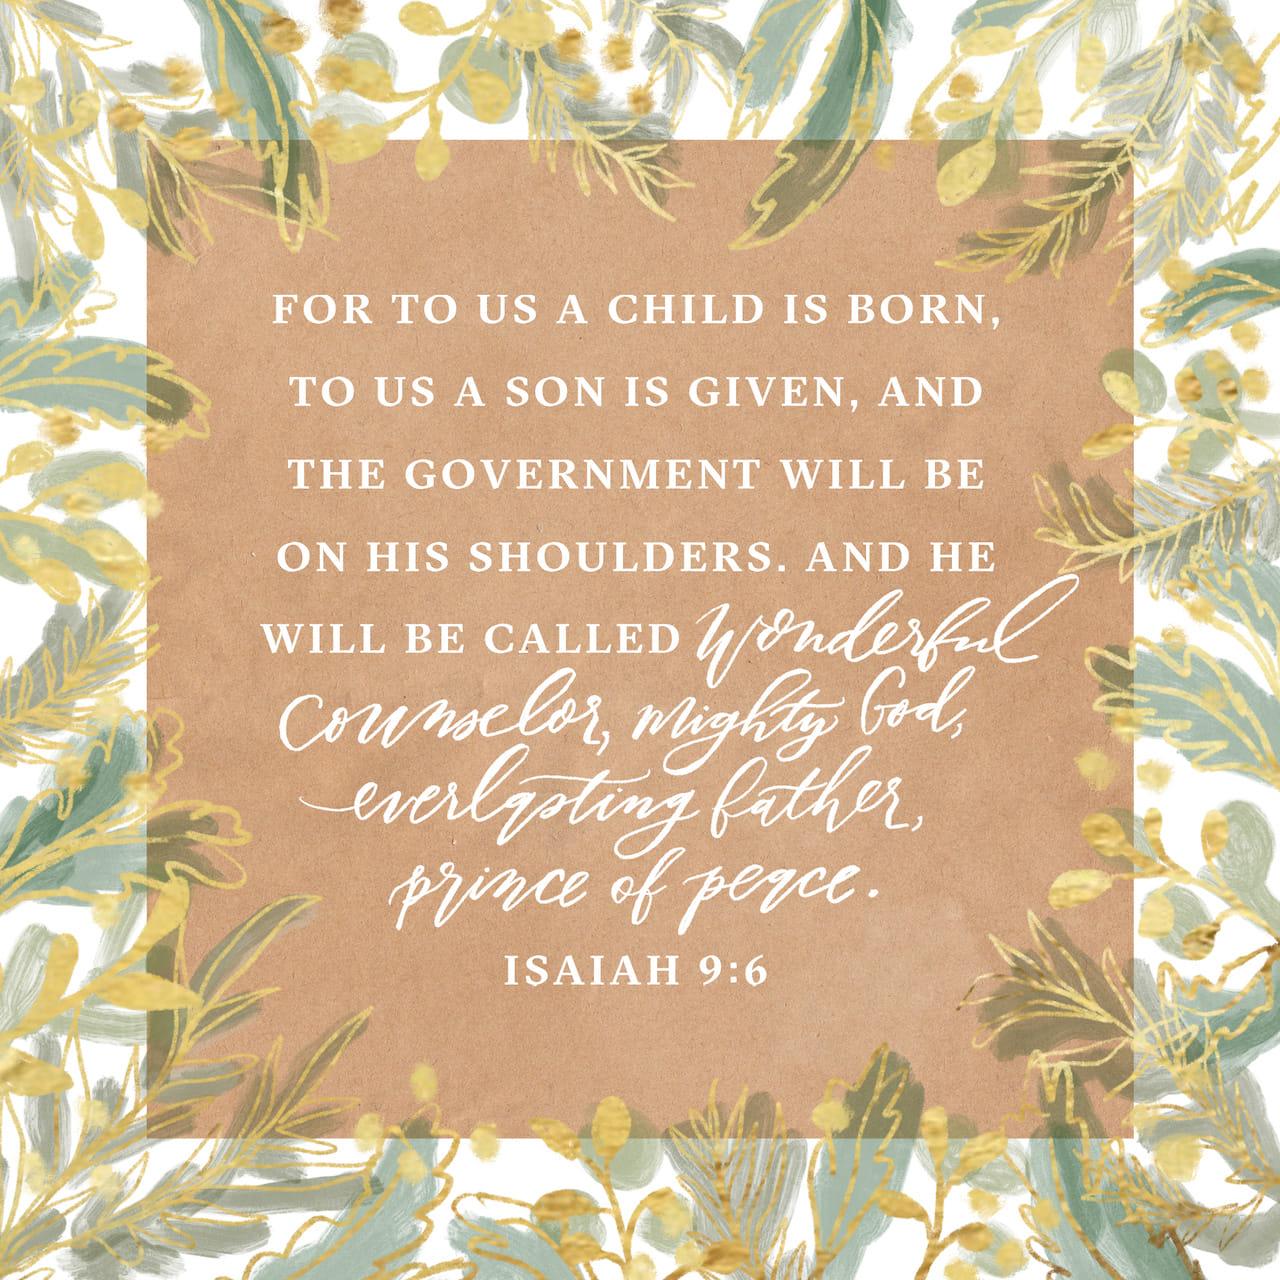 Bible Verse of the Day - day 83 - image 28559 (Isaiah 9:1-7)